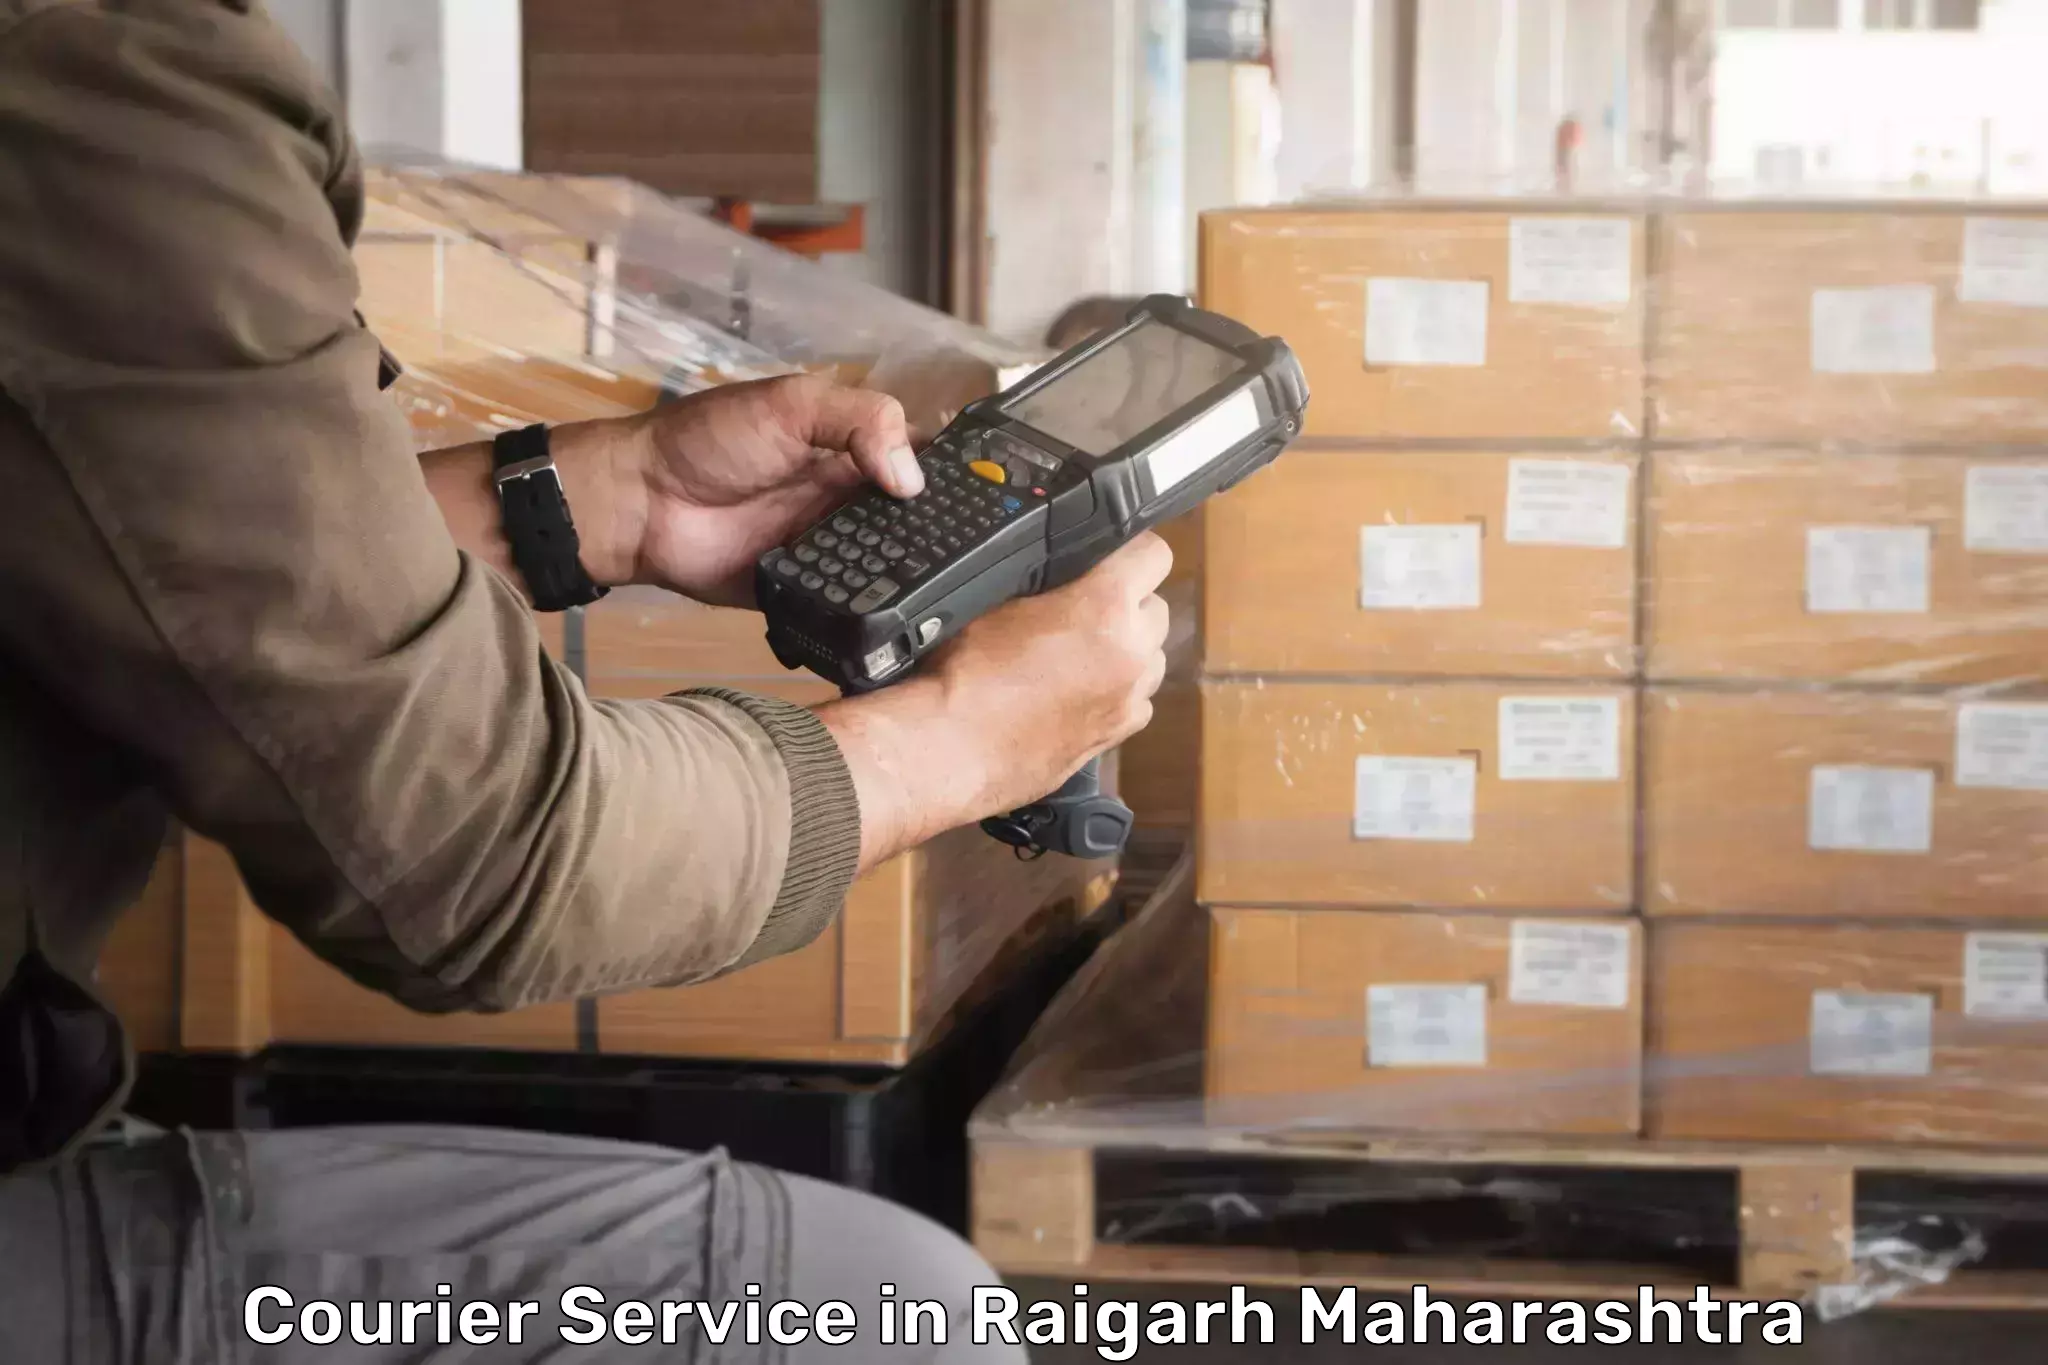 Scalable shipping solutions in Raigarh Maharashtra